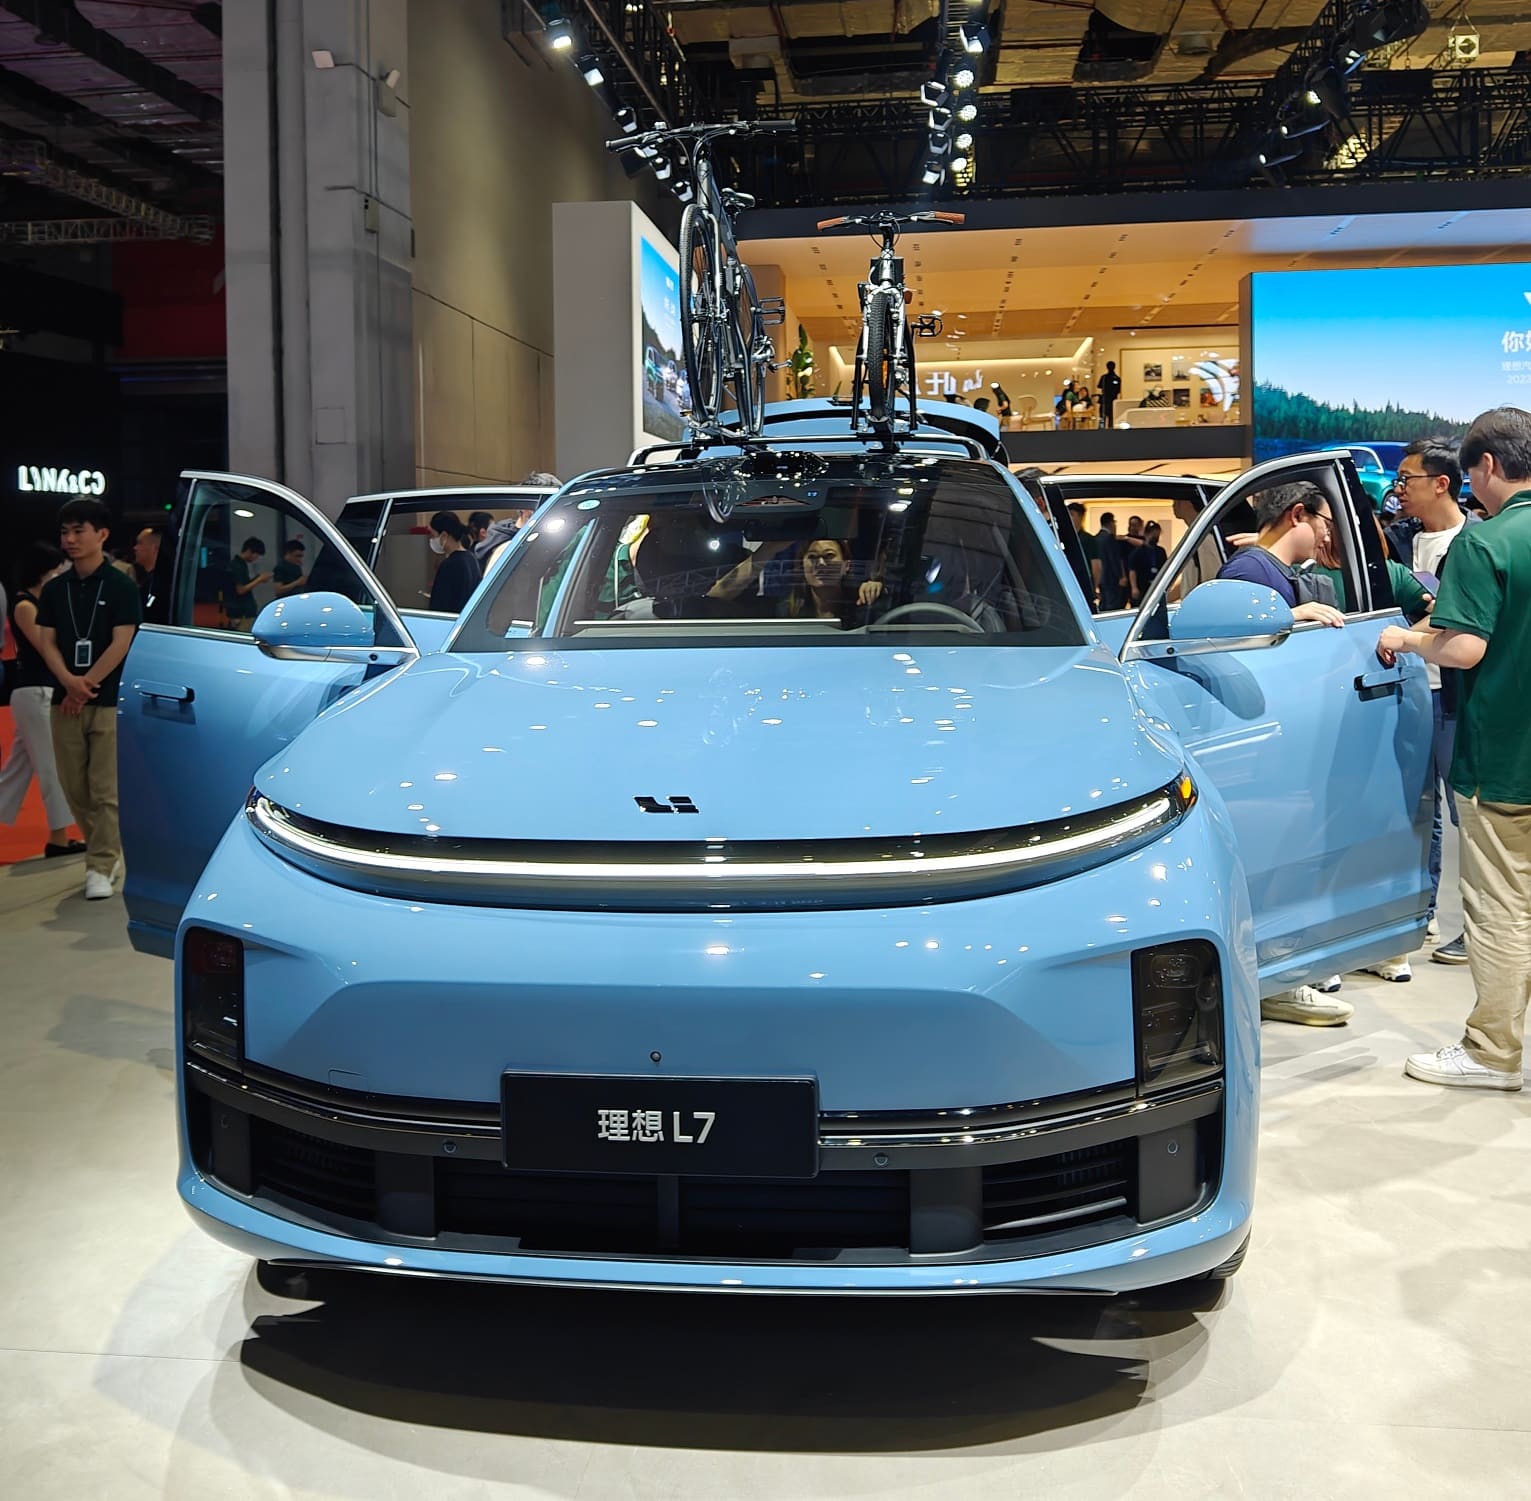 Li Auto's first pure EV will get CATL's Qilin battery. To launch 5 BEV  models by 2025